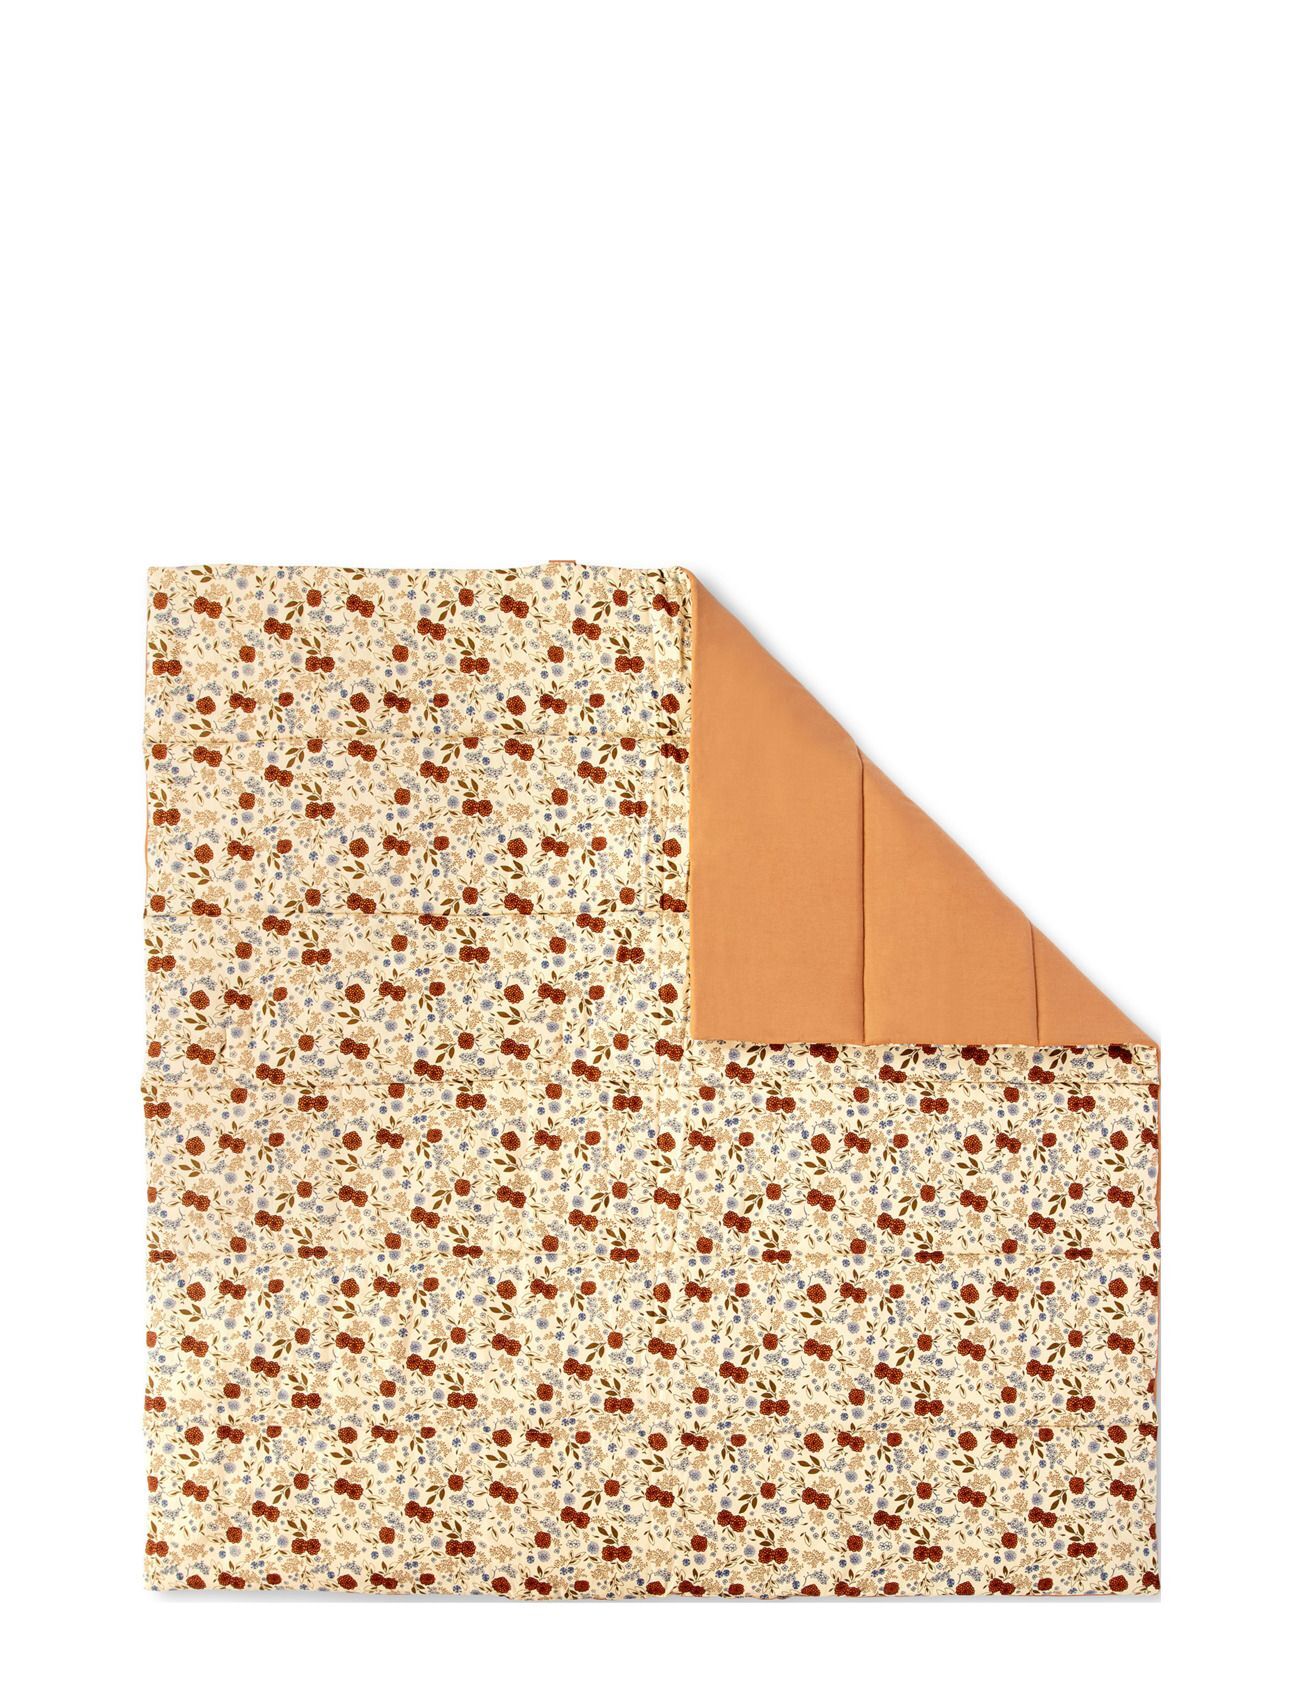 That's Write Play Mat Woodland/Golden Mist Baby & Maternity Play Mats Oransje That's Mine